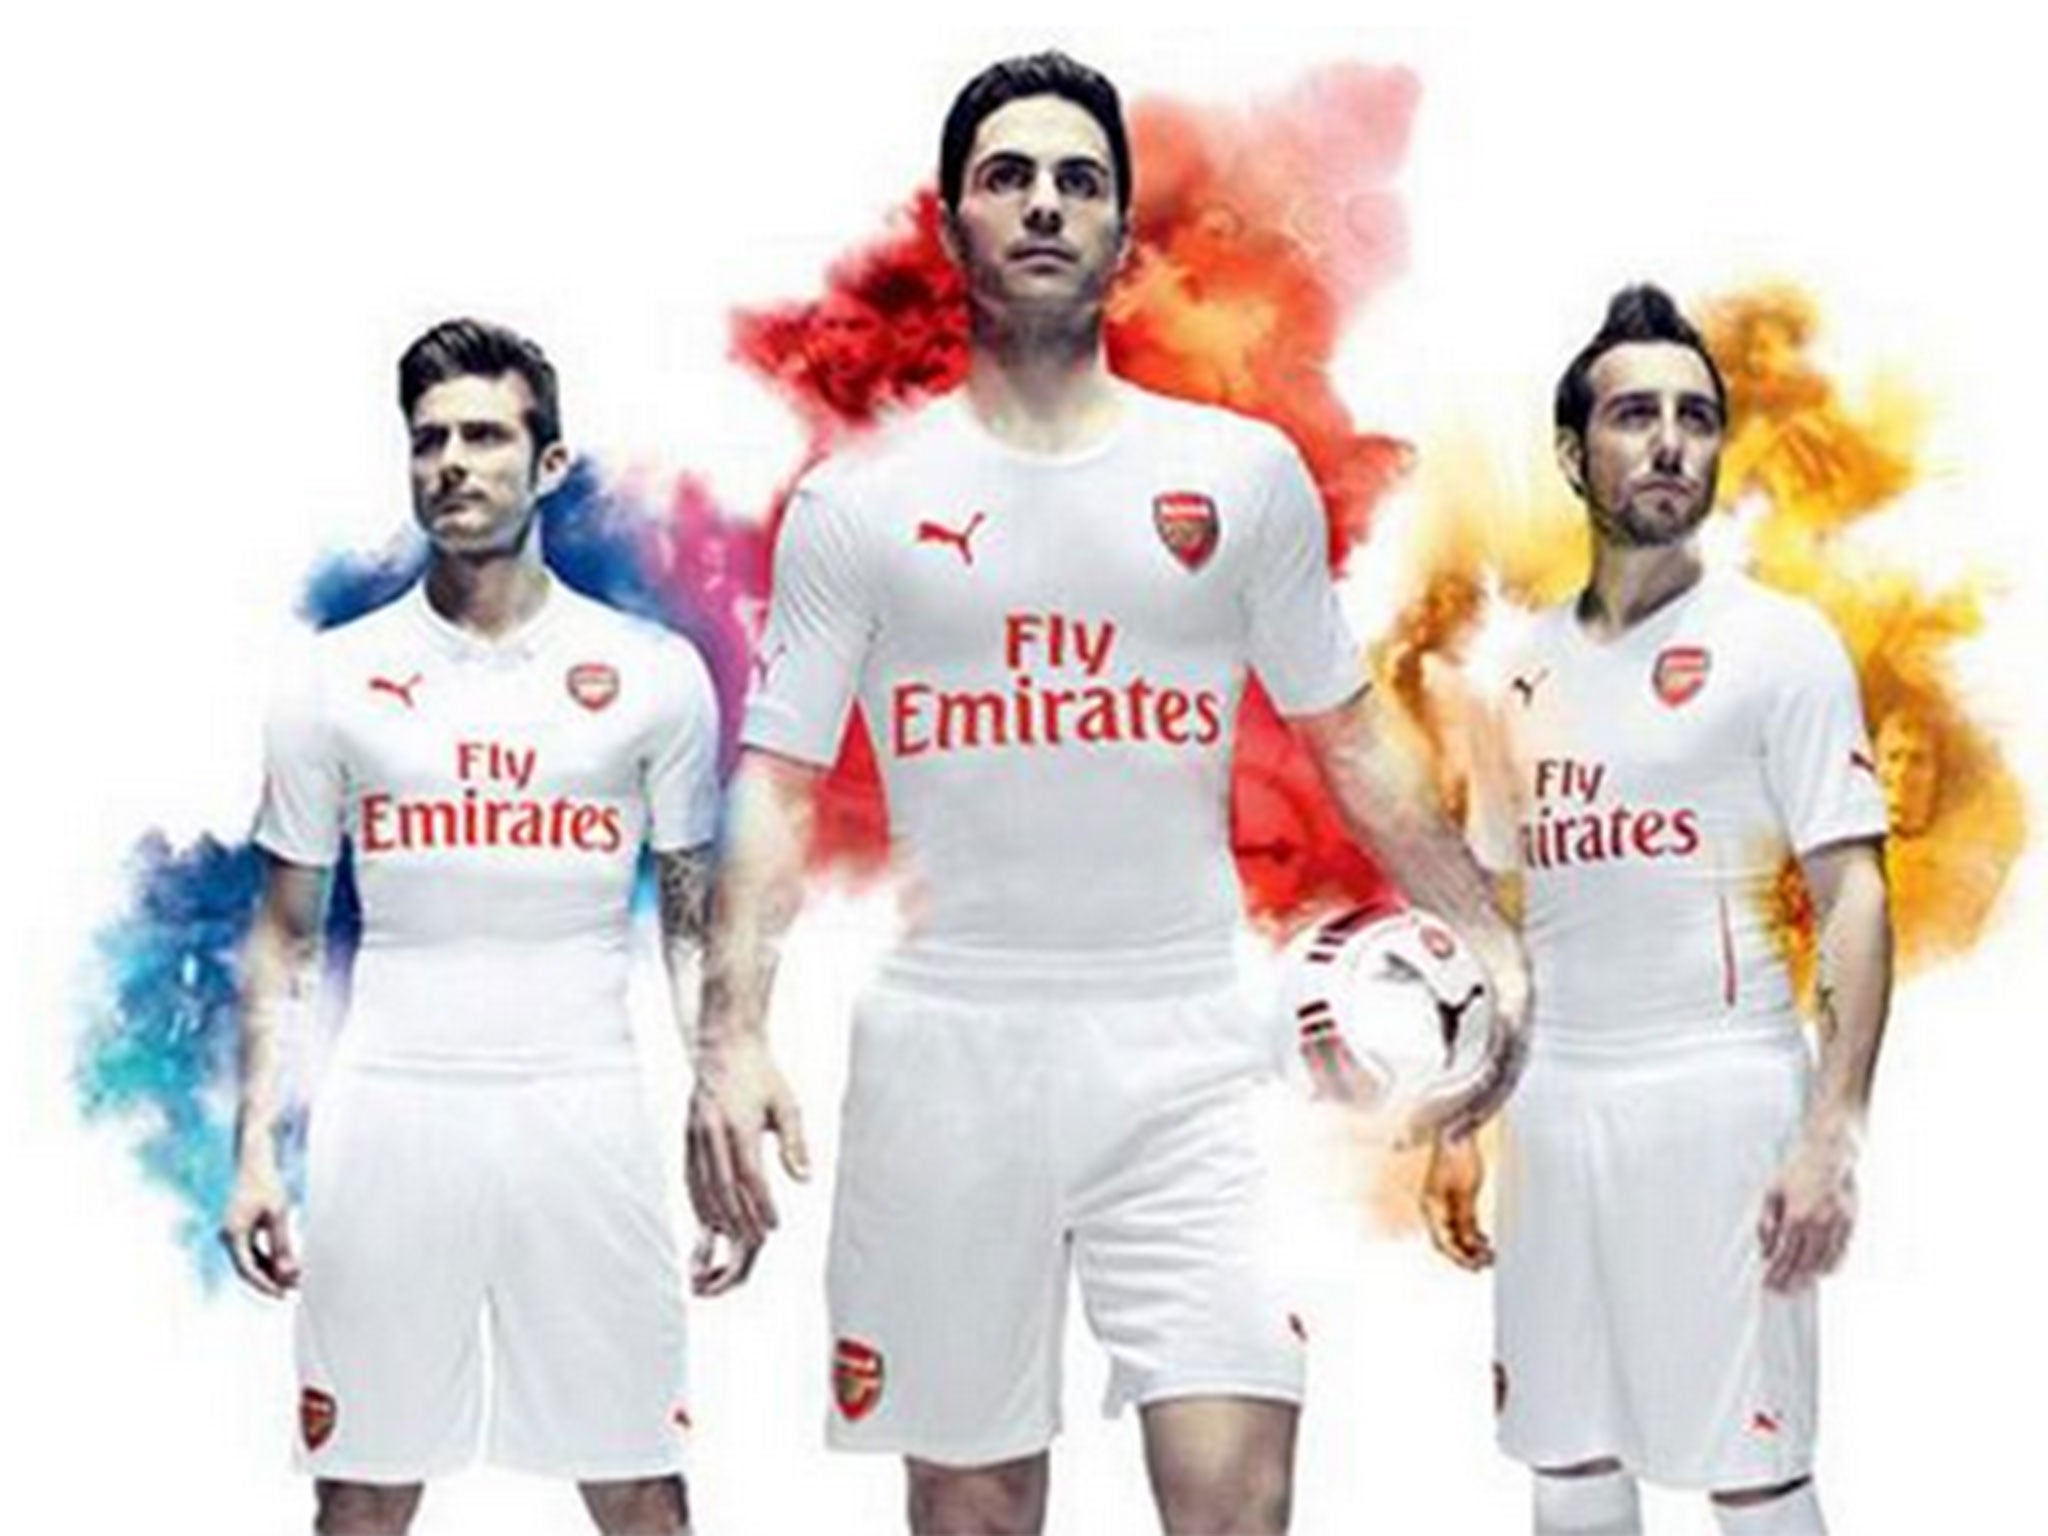 Arsenal started their new deal with sportswear brand Puma today, launching a series of teasers